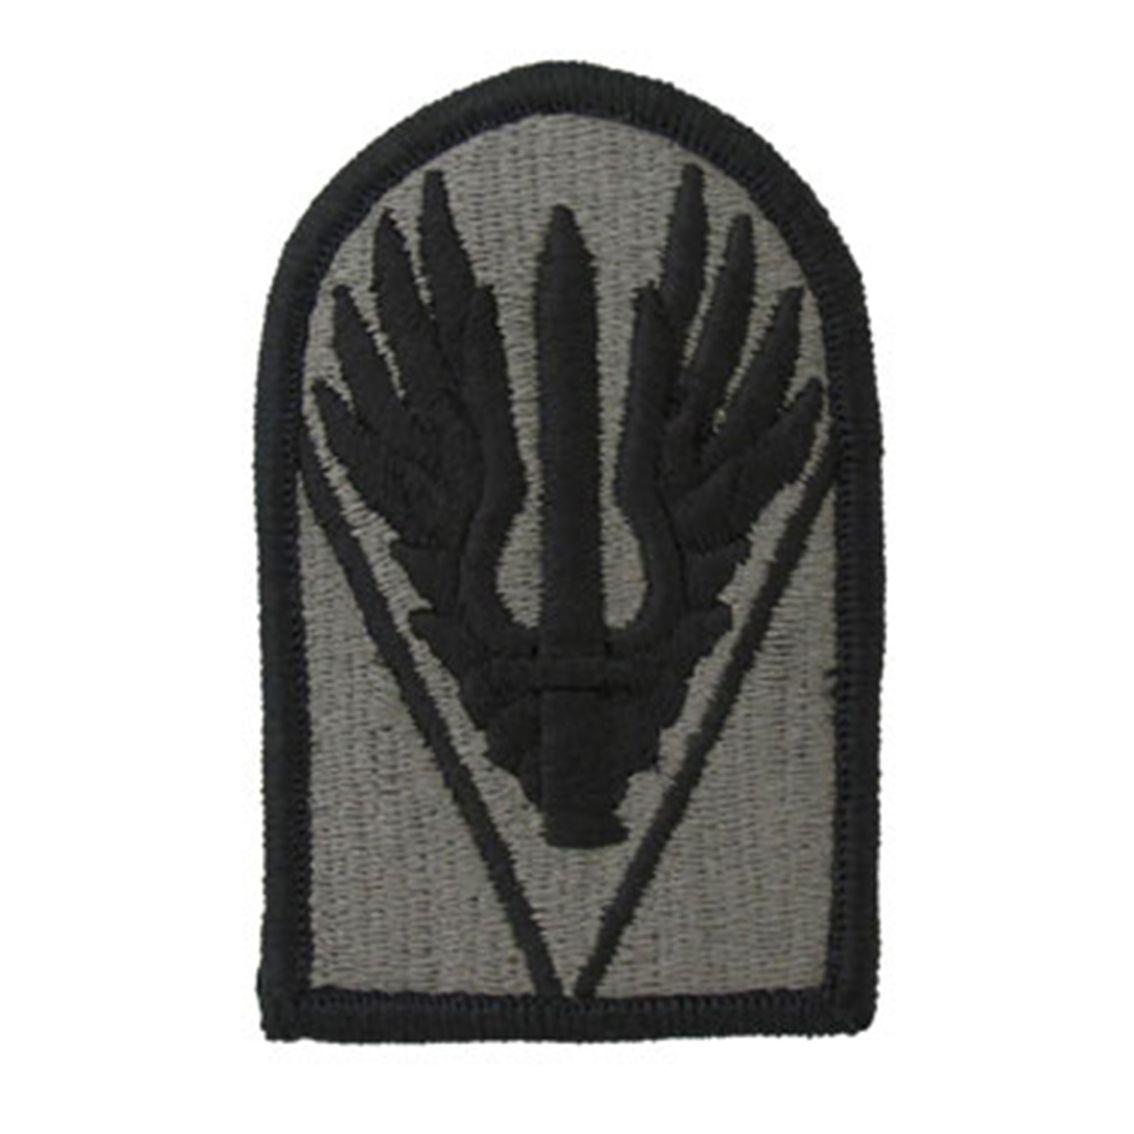 JRTC Logo - Army Unit Patch Joint Readiness Training Center (jrtc)st Unit